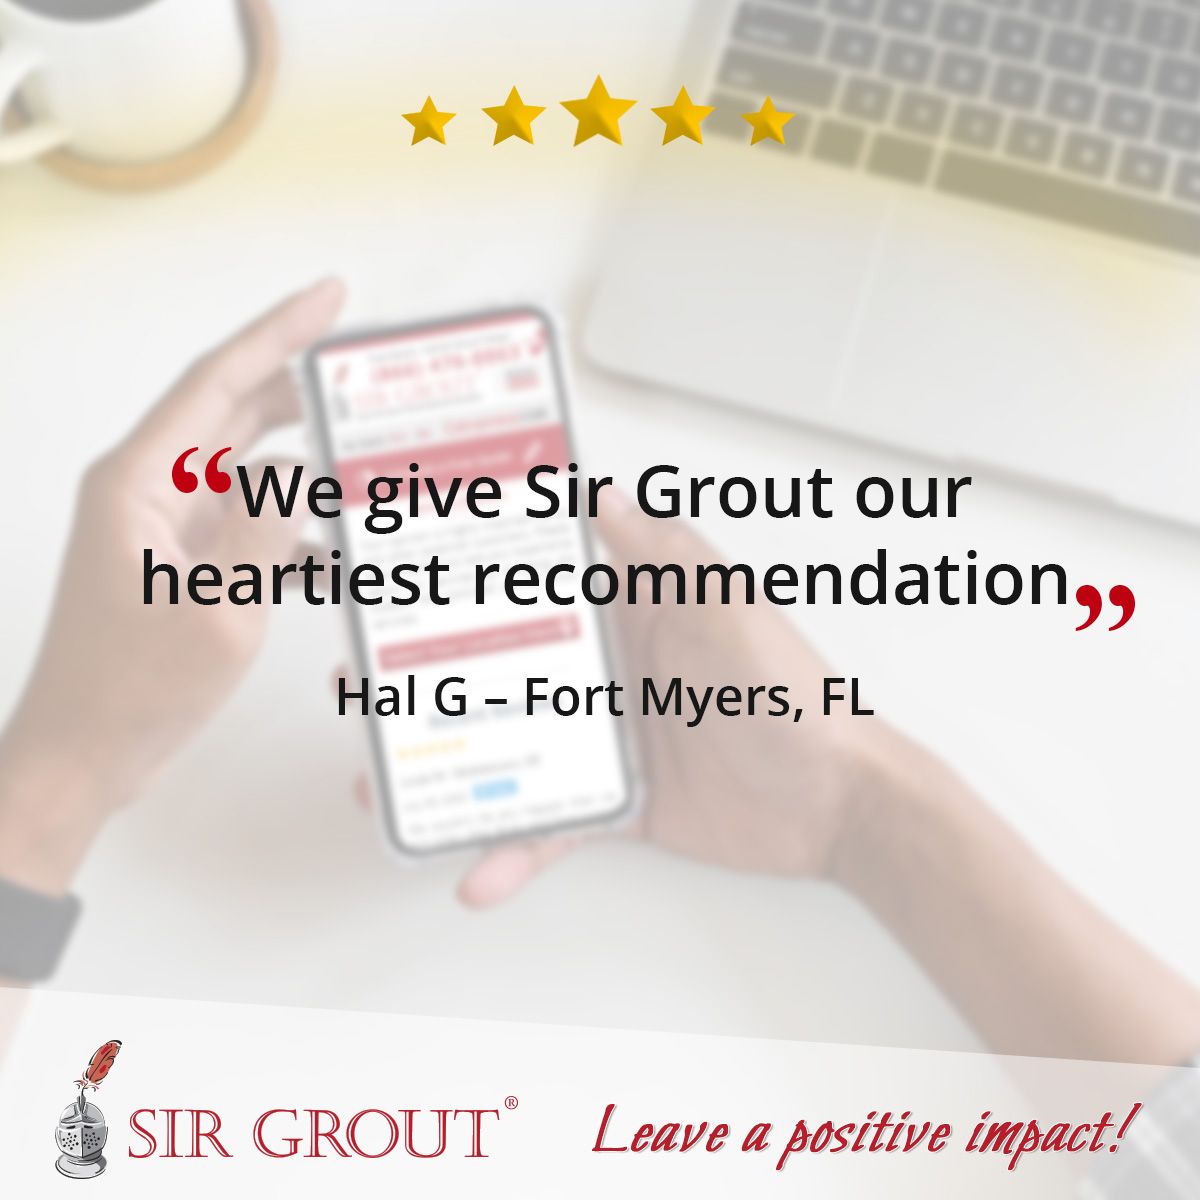 We give Sir Grout our heartiest recommendation